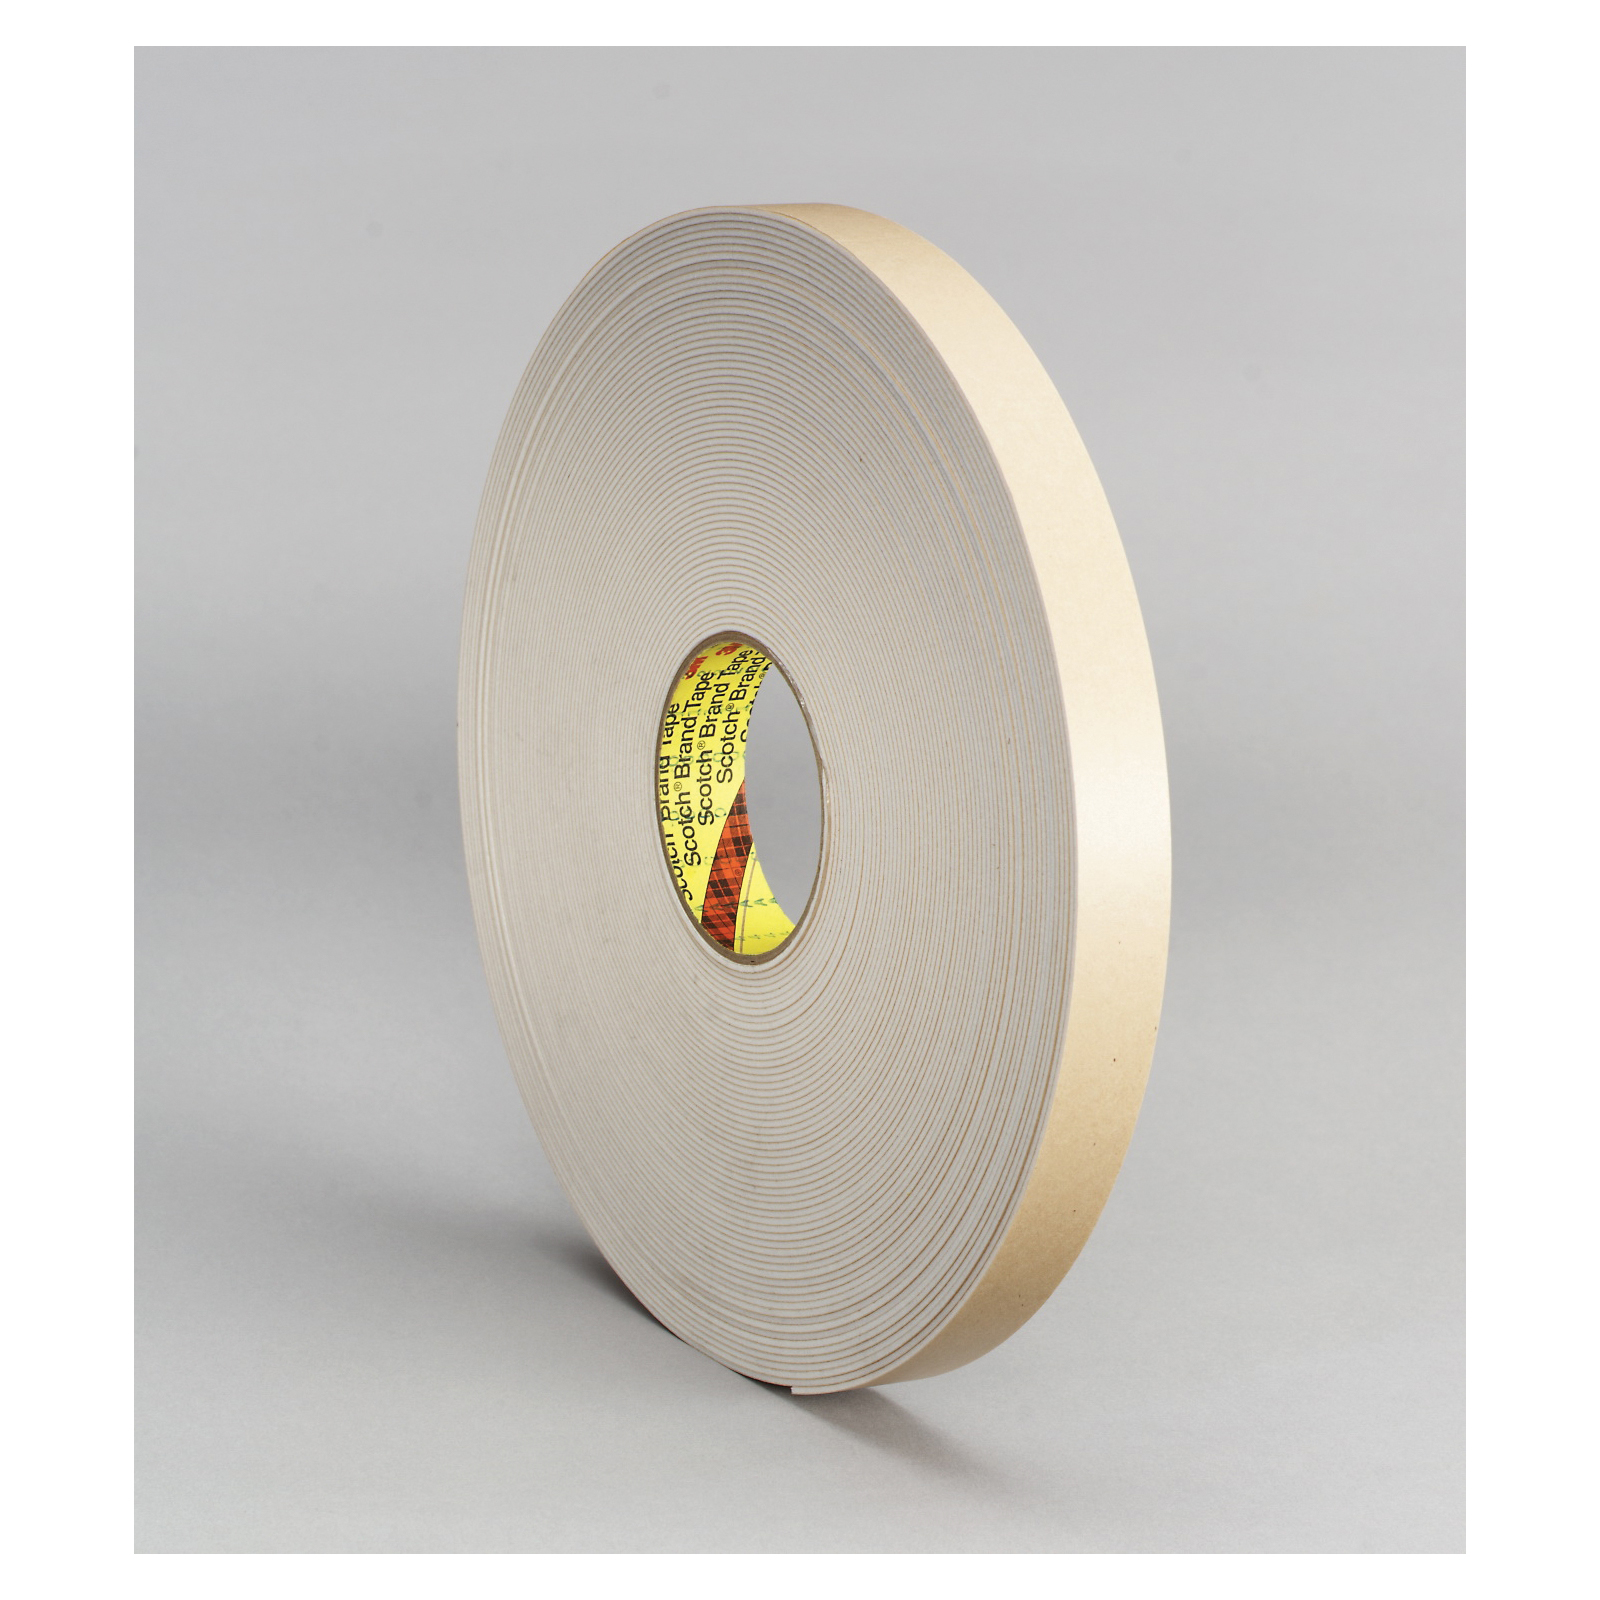 3M™ 021200-24308 Double Coated Tape, 36 yd L x 1/2 in W, 62 mil THK, Acrylic Adhesive, Polyethylene Foam Backing, White